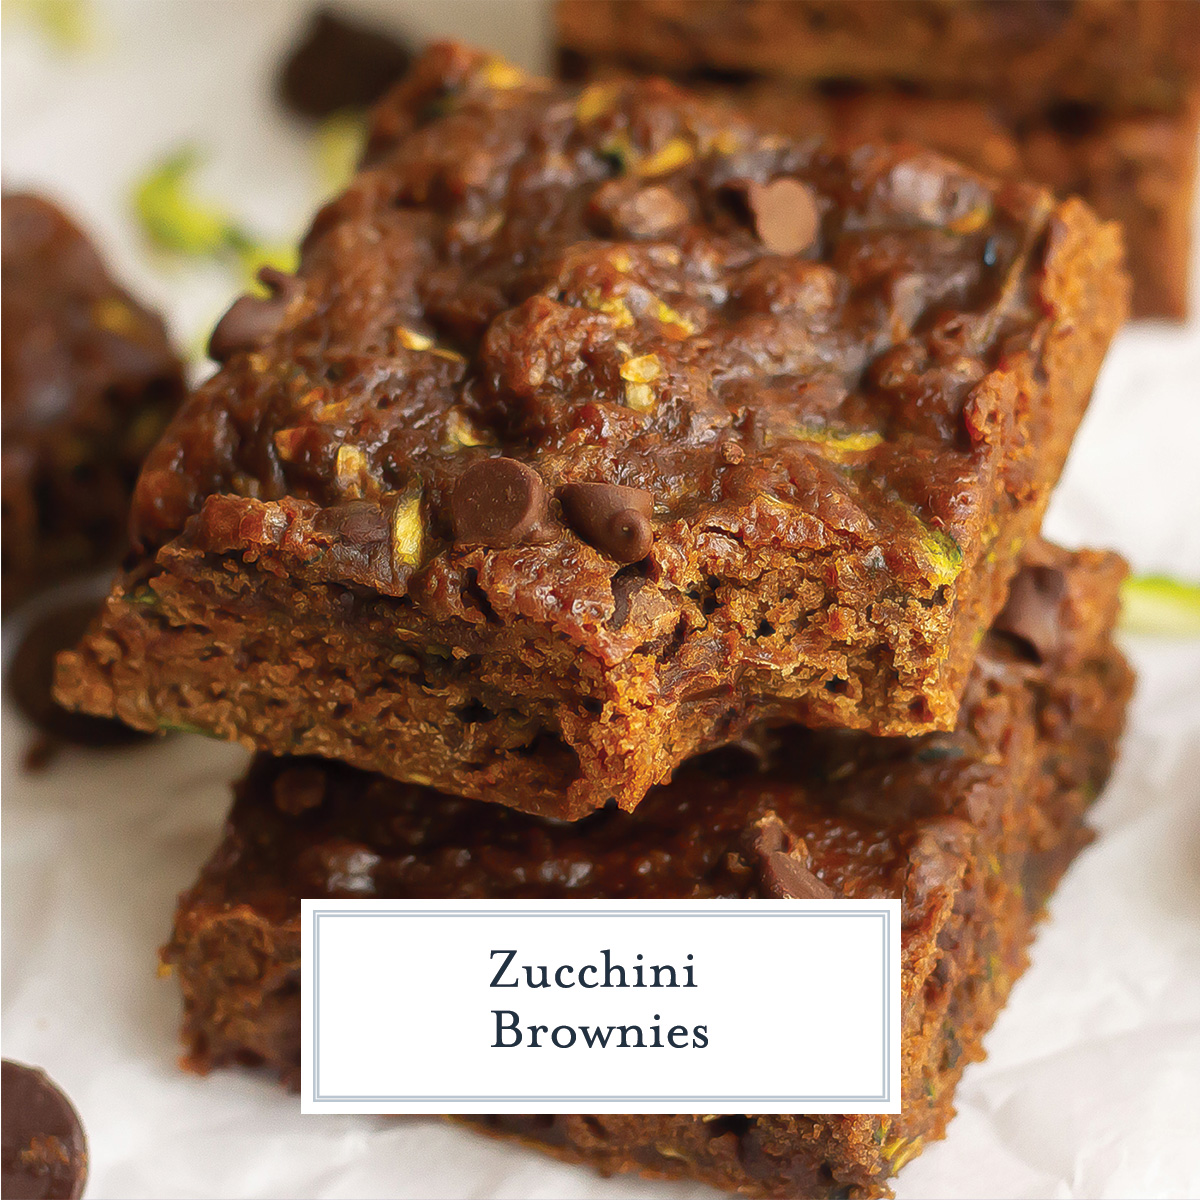 zucchini brownies with text overlay